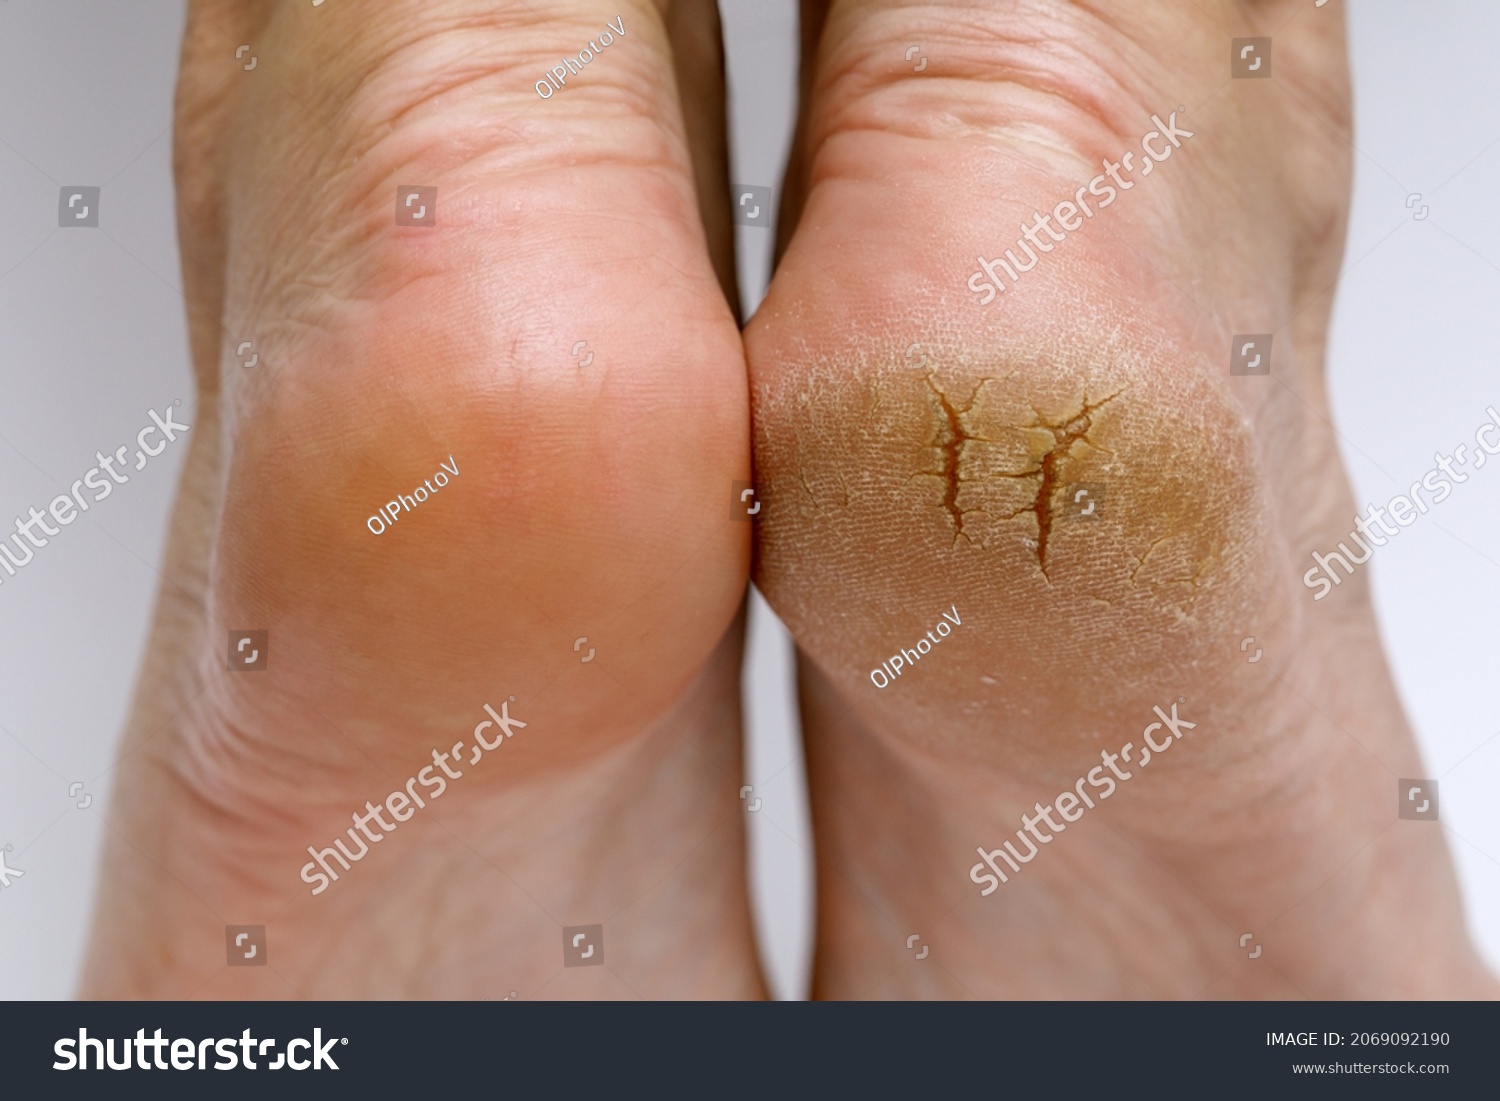 Cracked heels before and after treatment and treatment. Medical pedicure in a beauty salon. Problematic dehydrated feet with dry skin. Close-up photo of legs.  #2069092190